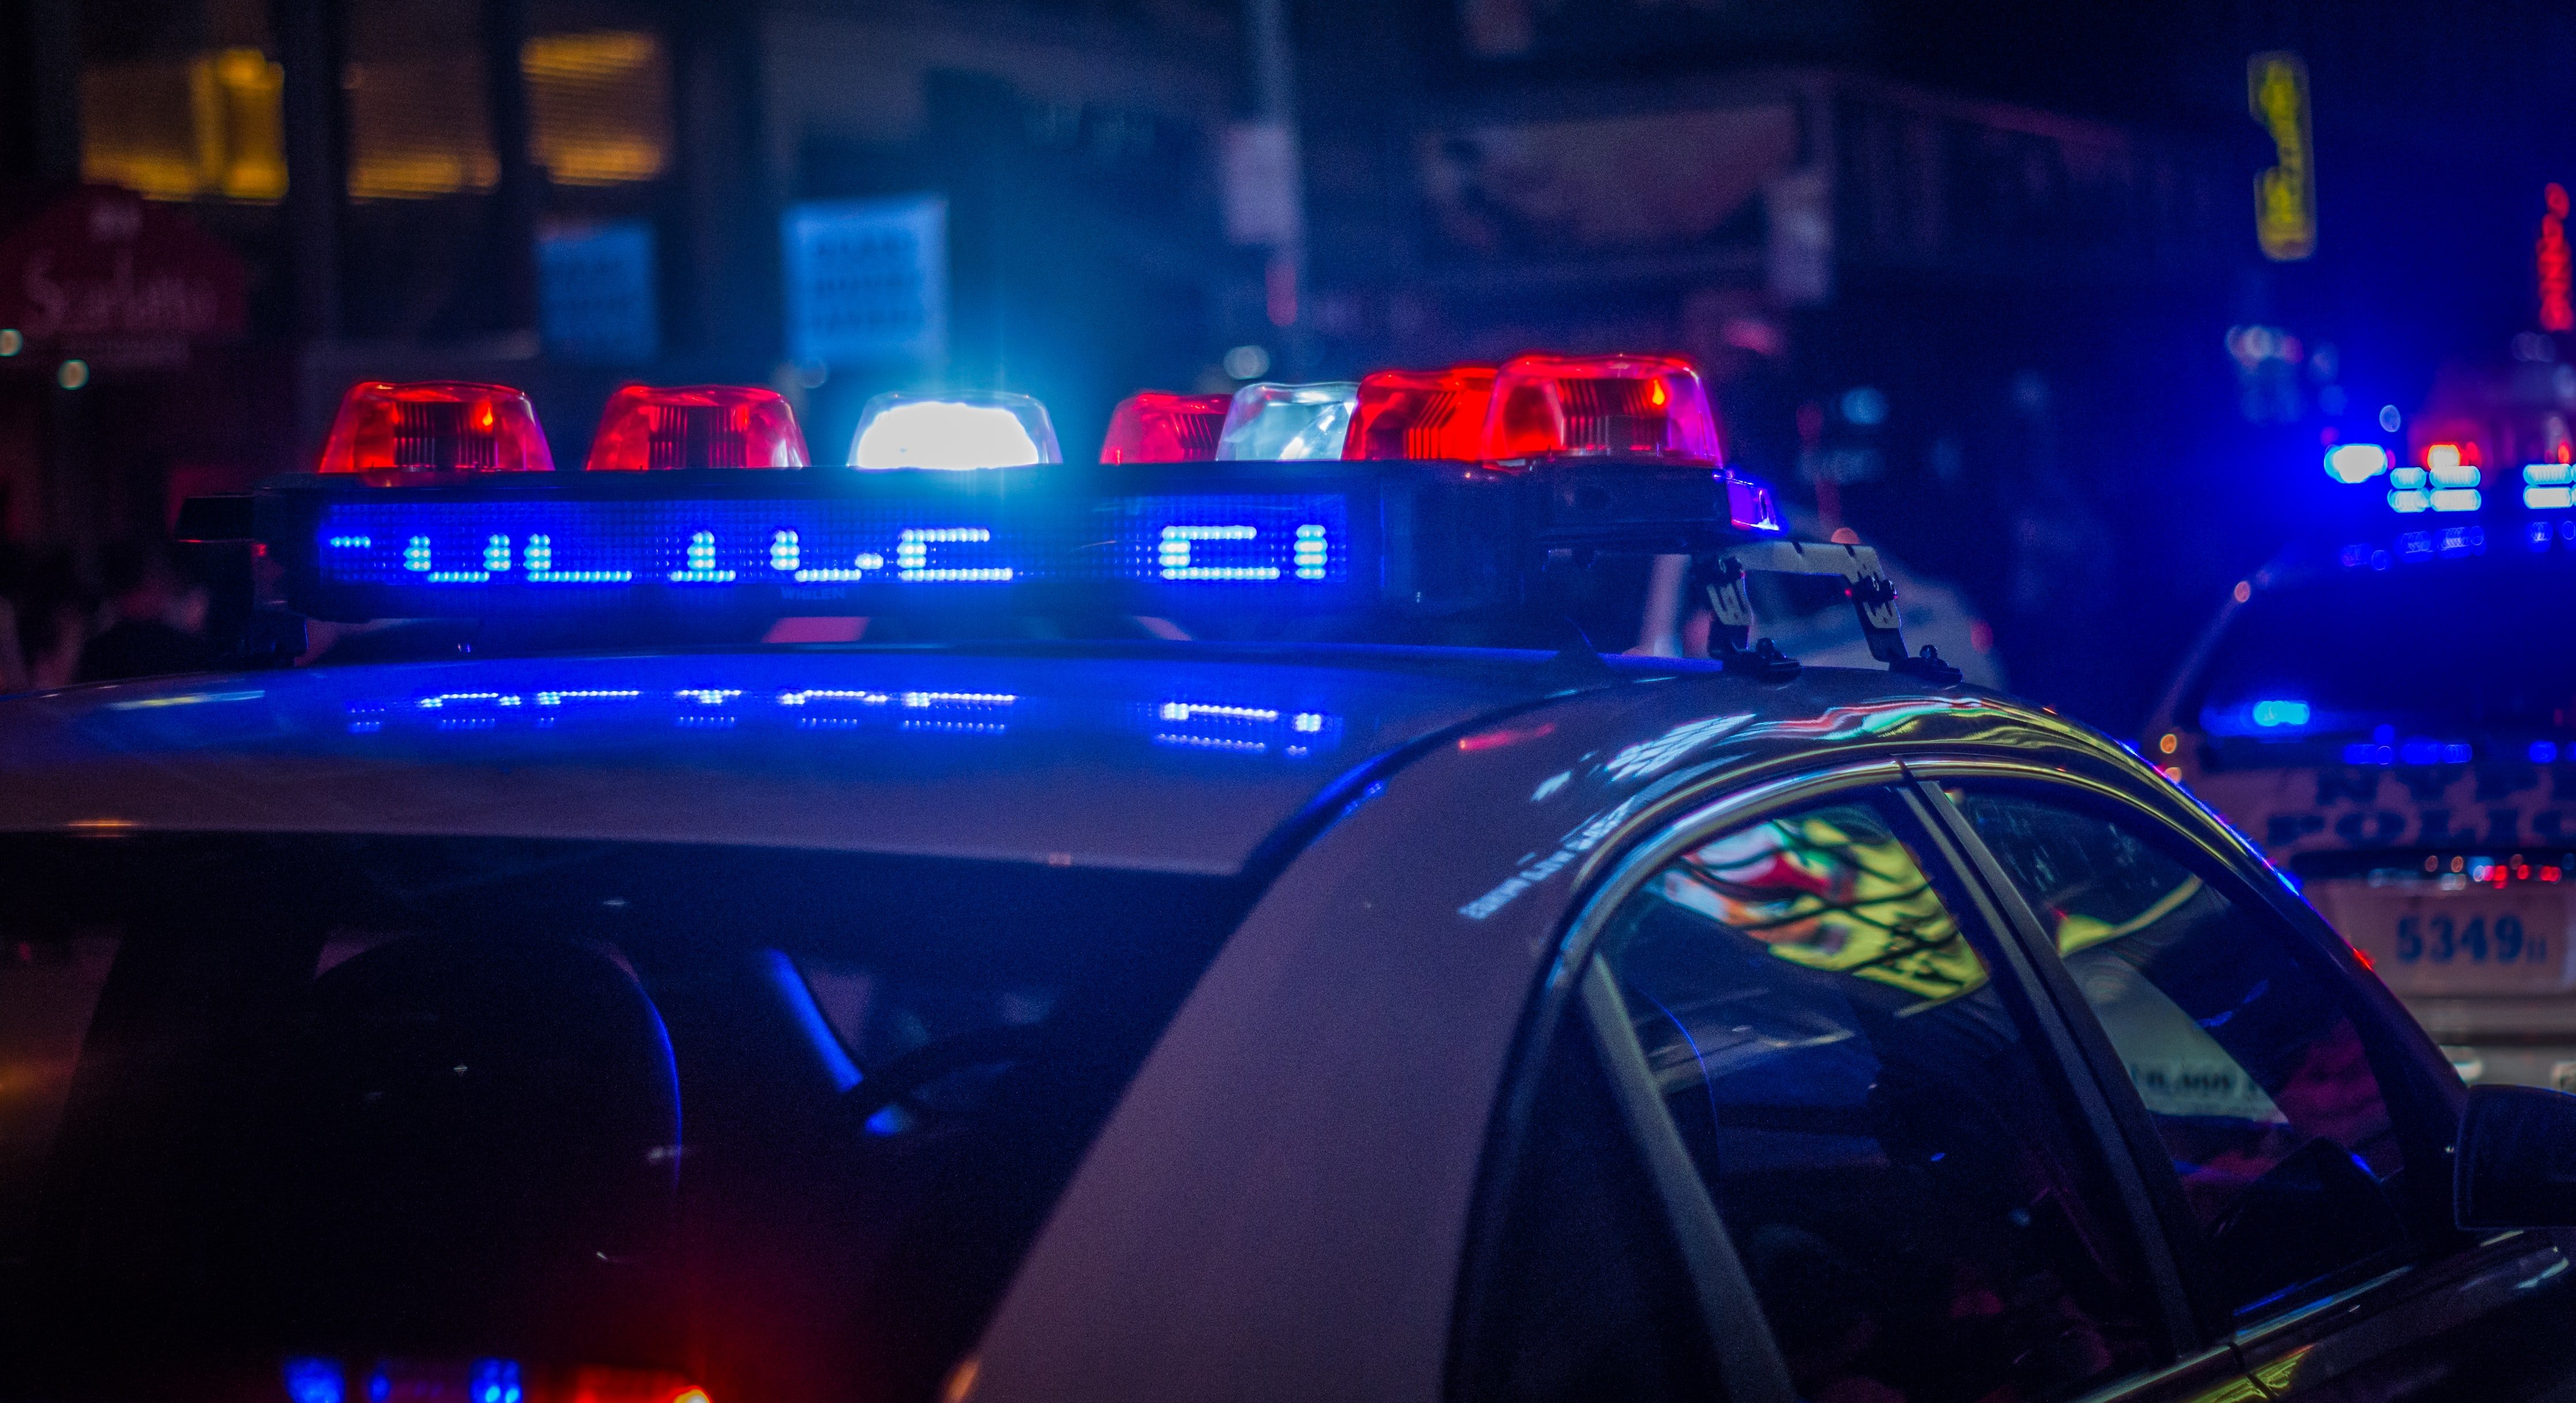 Cops arrive at the scene along with an ambulance | Photo: Unsplash